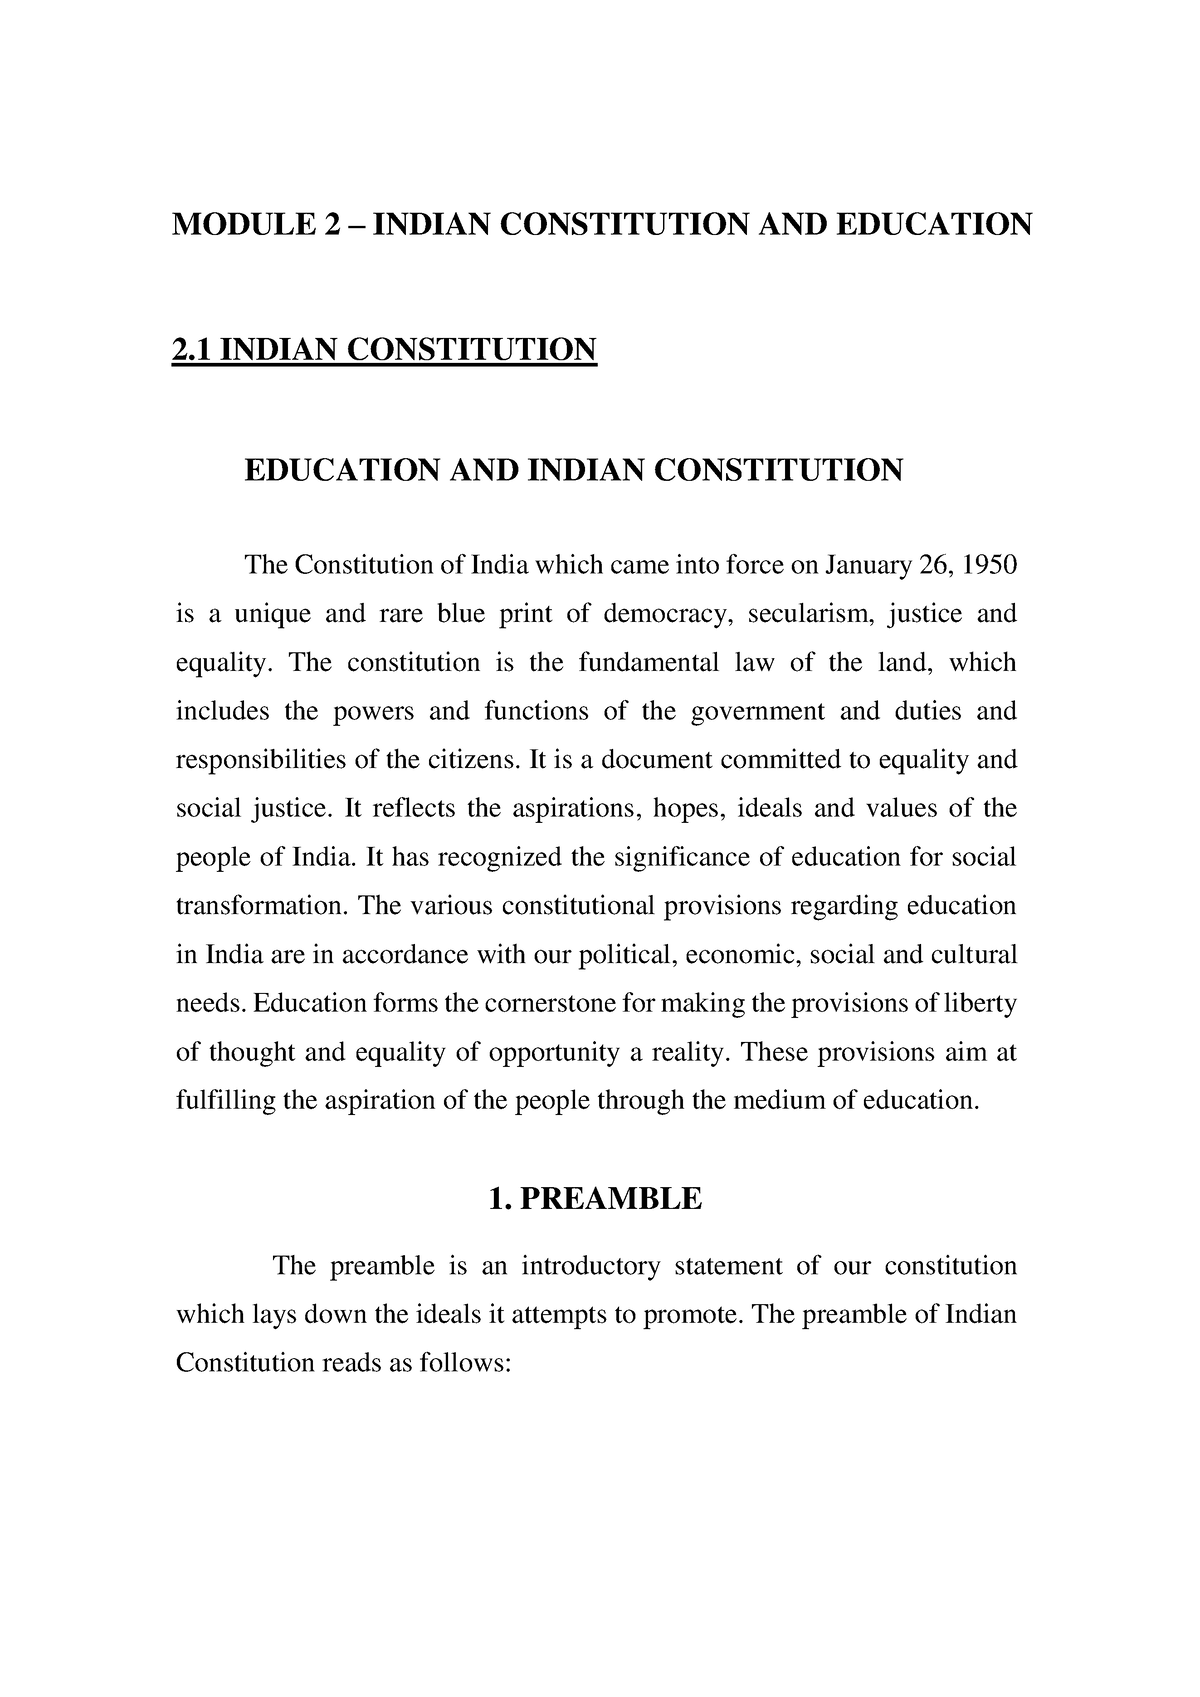 assignment on education in the indian constitution introduction